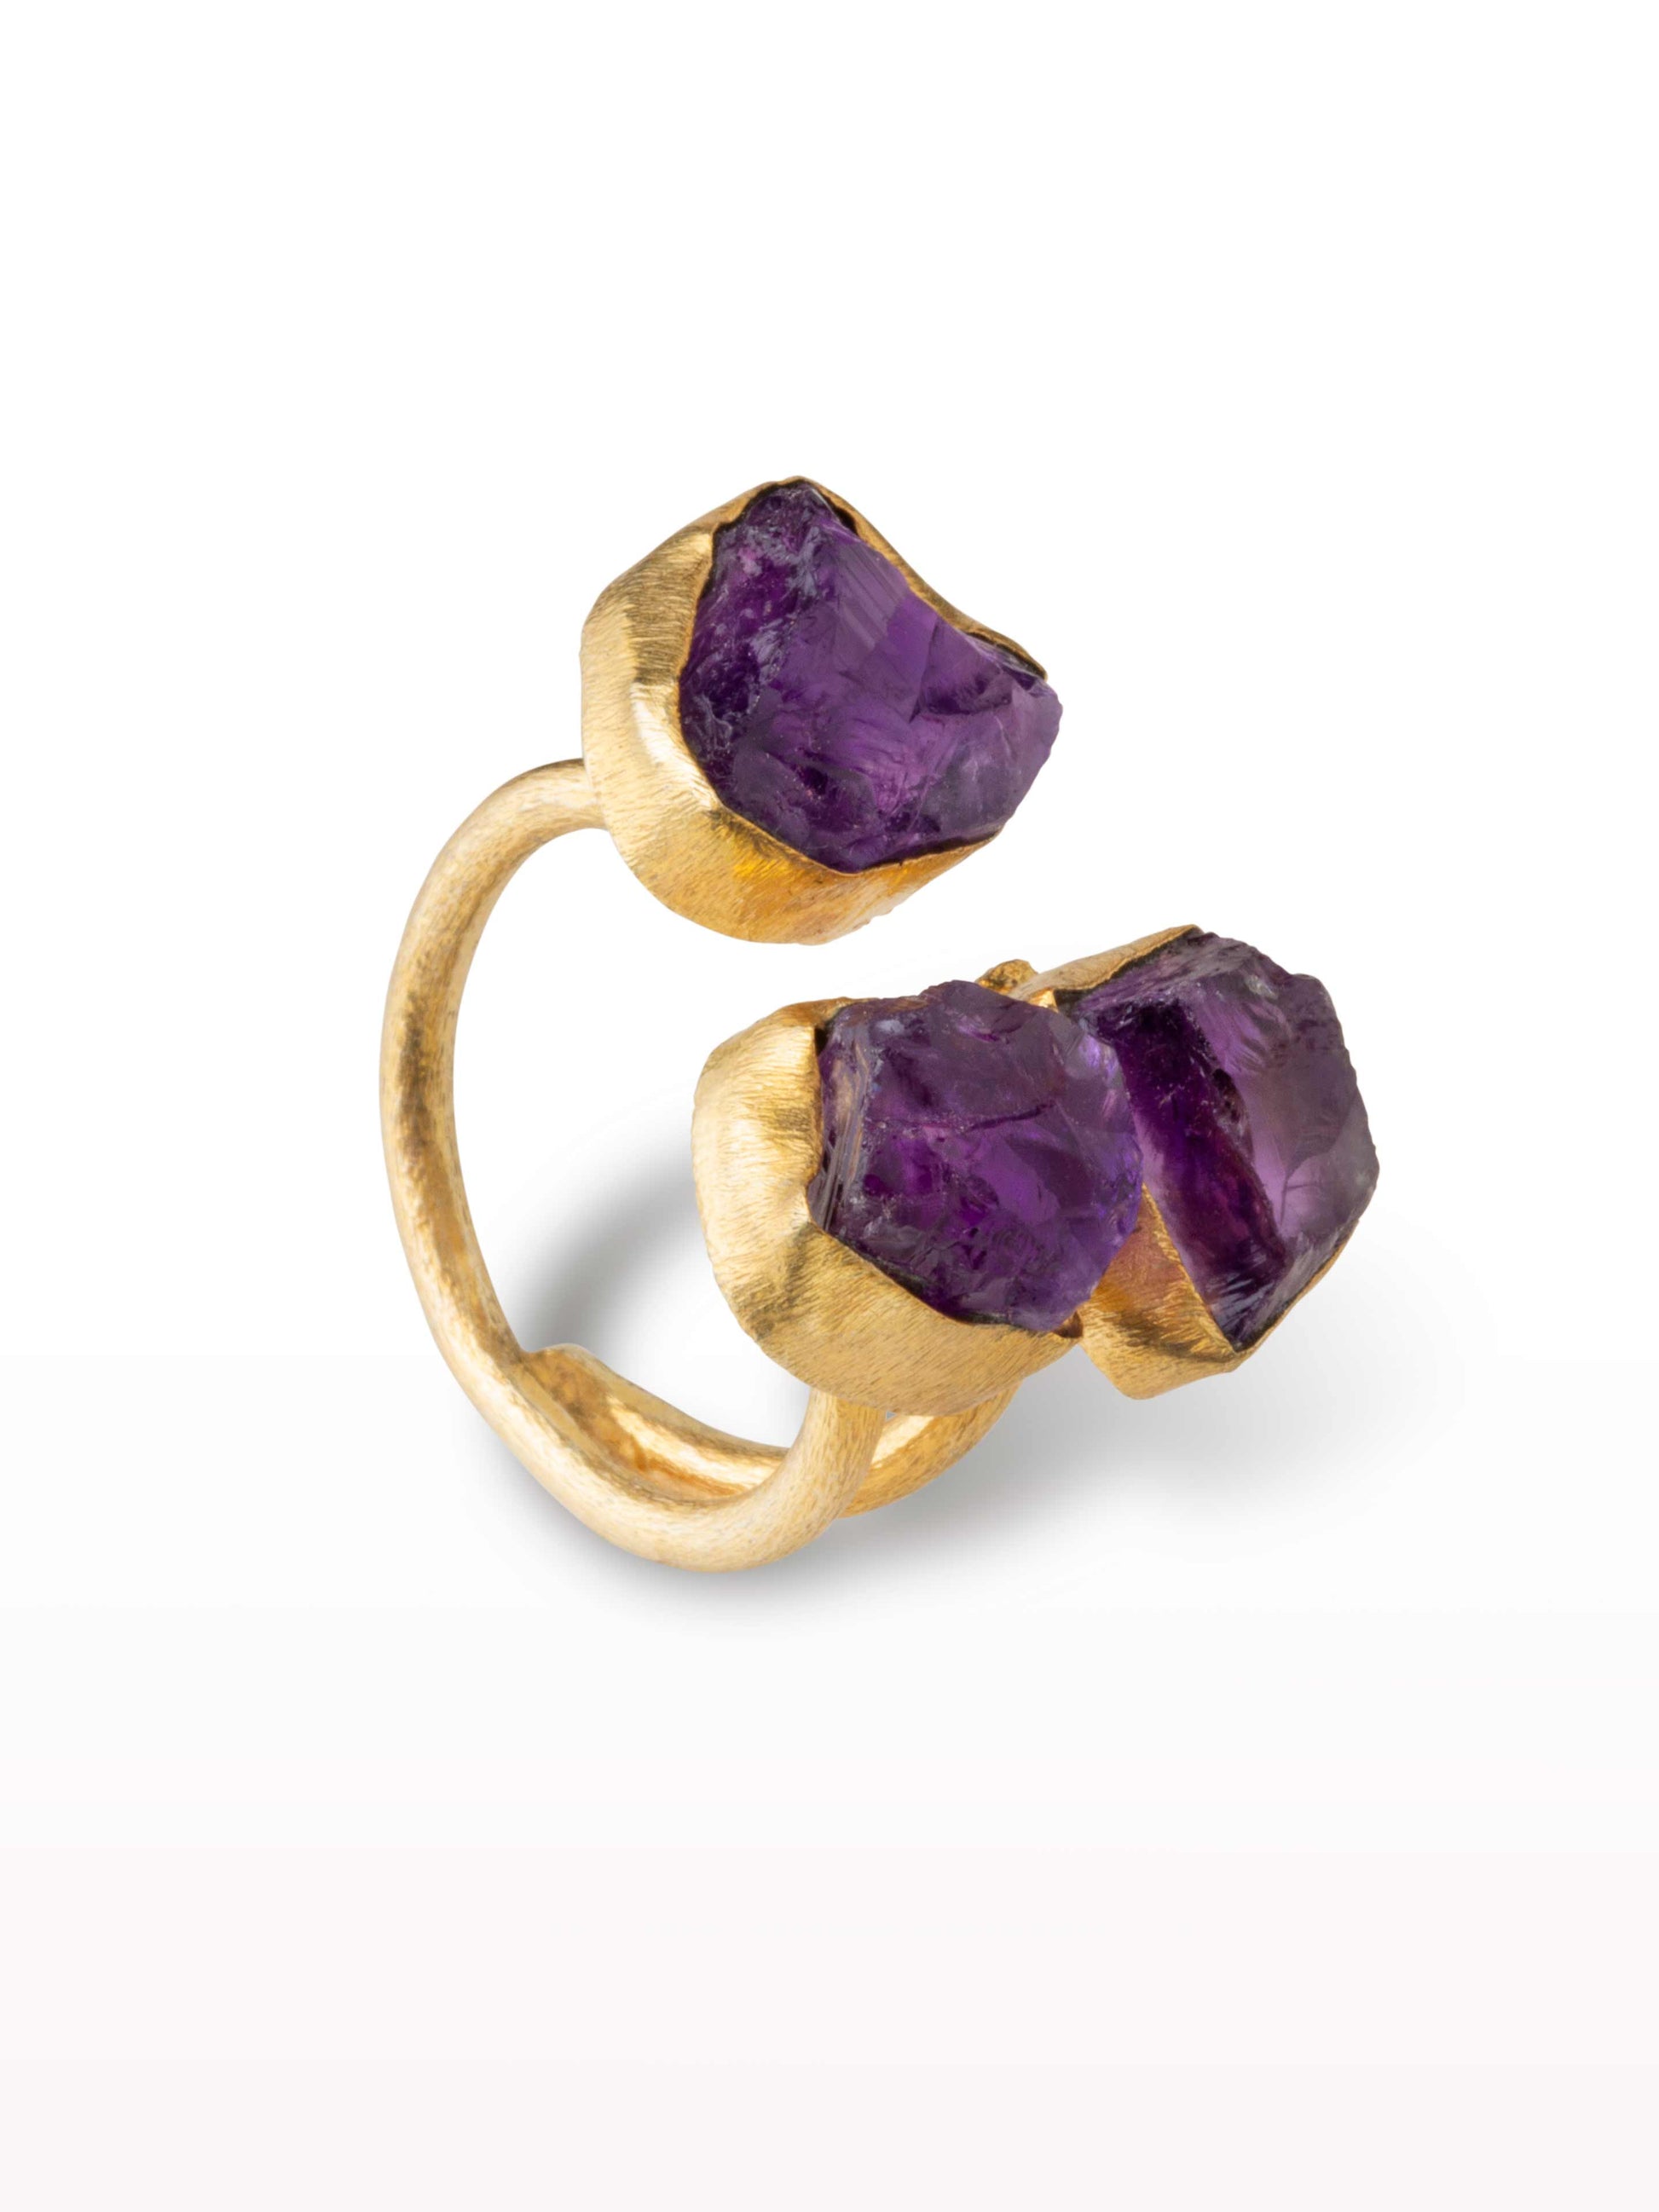 Triple set adjustable gold ring with amethyst